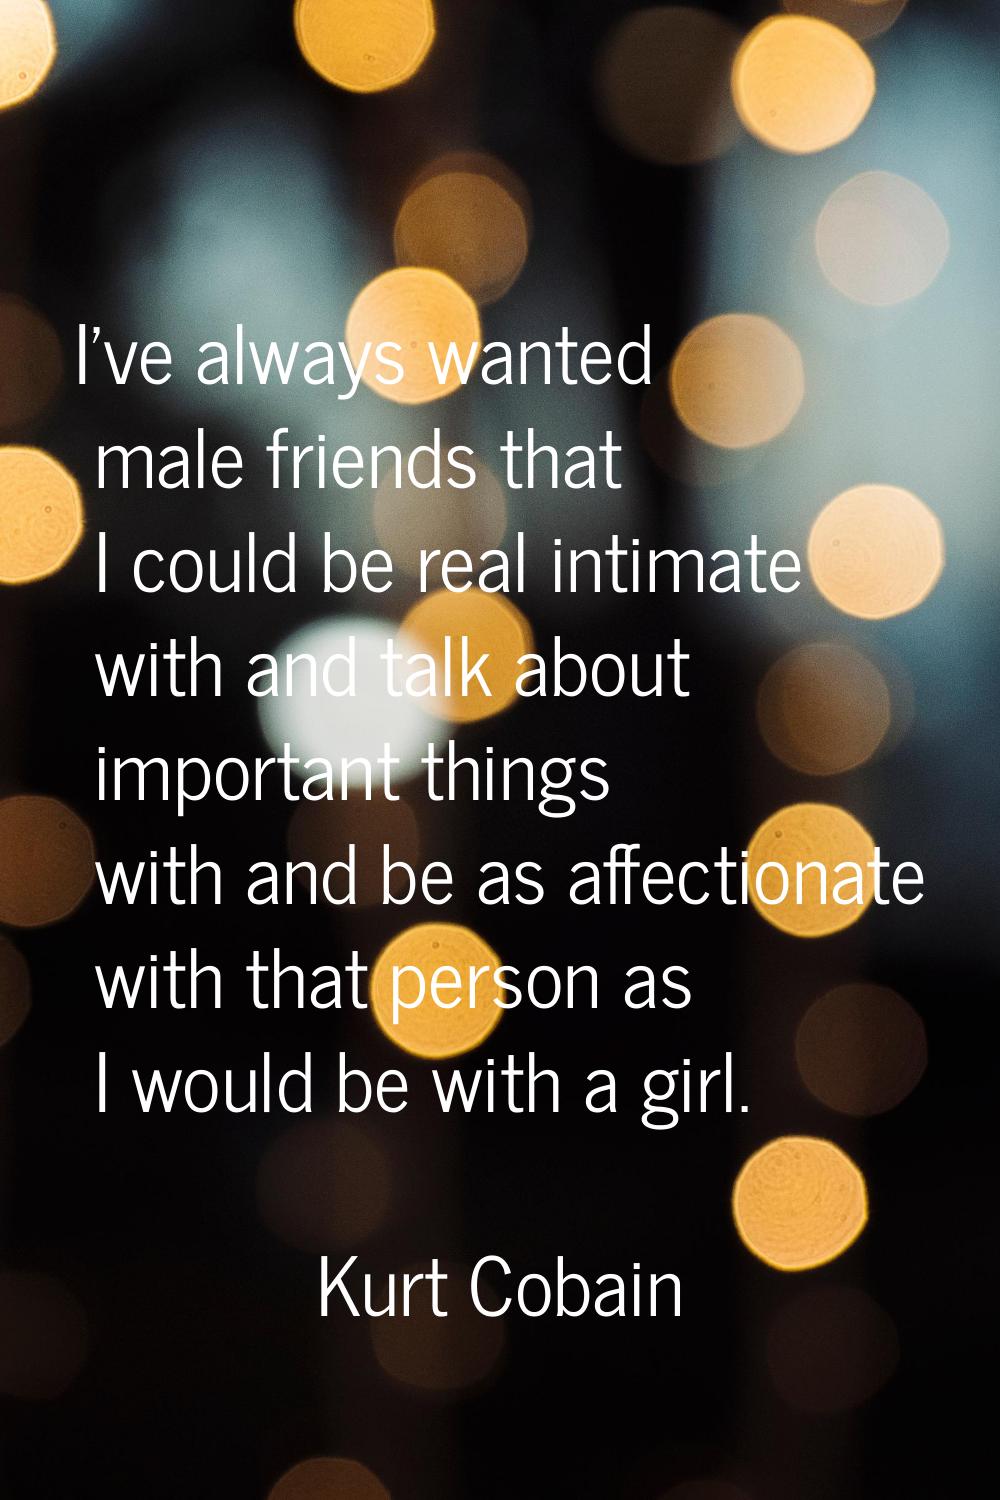 I've always wanted male friends that I could be real intimate with and talk about important things 